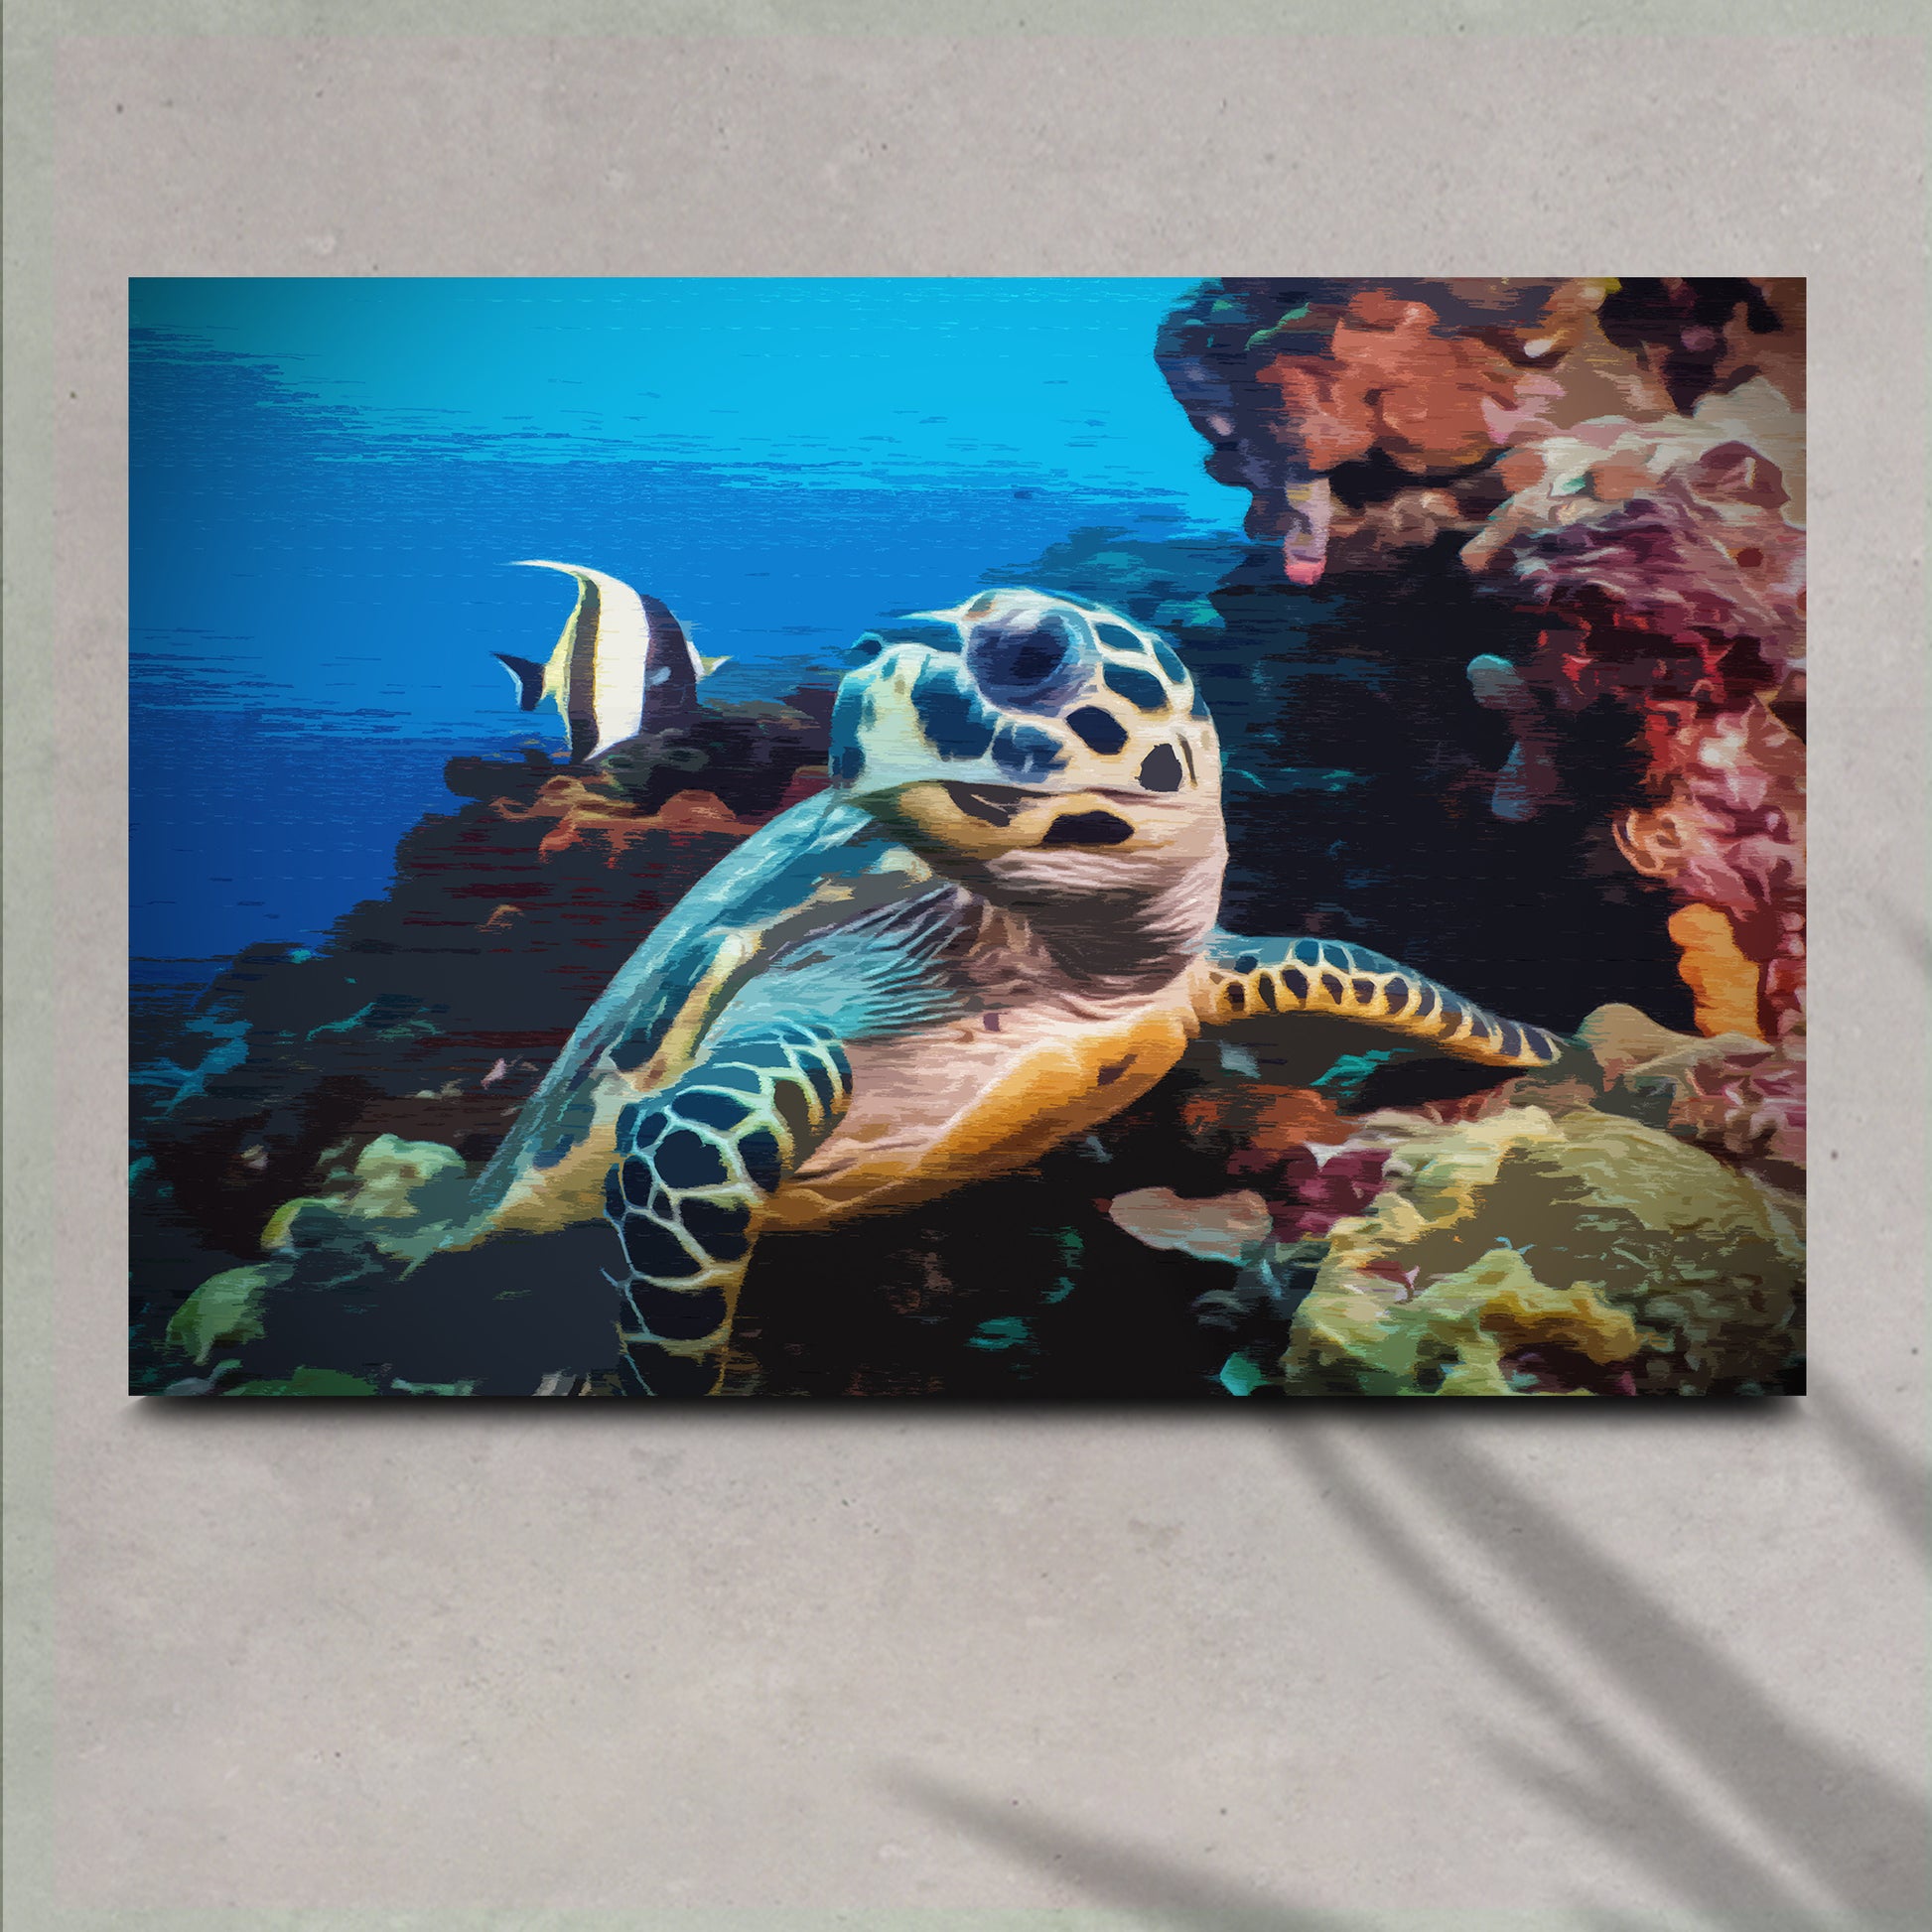 Underwater Sea Turtle Painting Canvas Wall Art - Image by Tailored Canvases